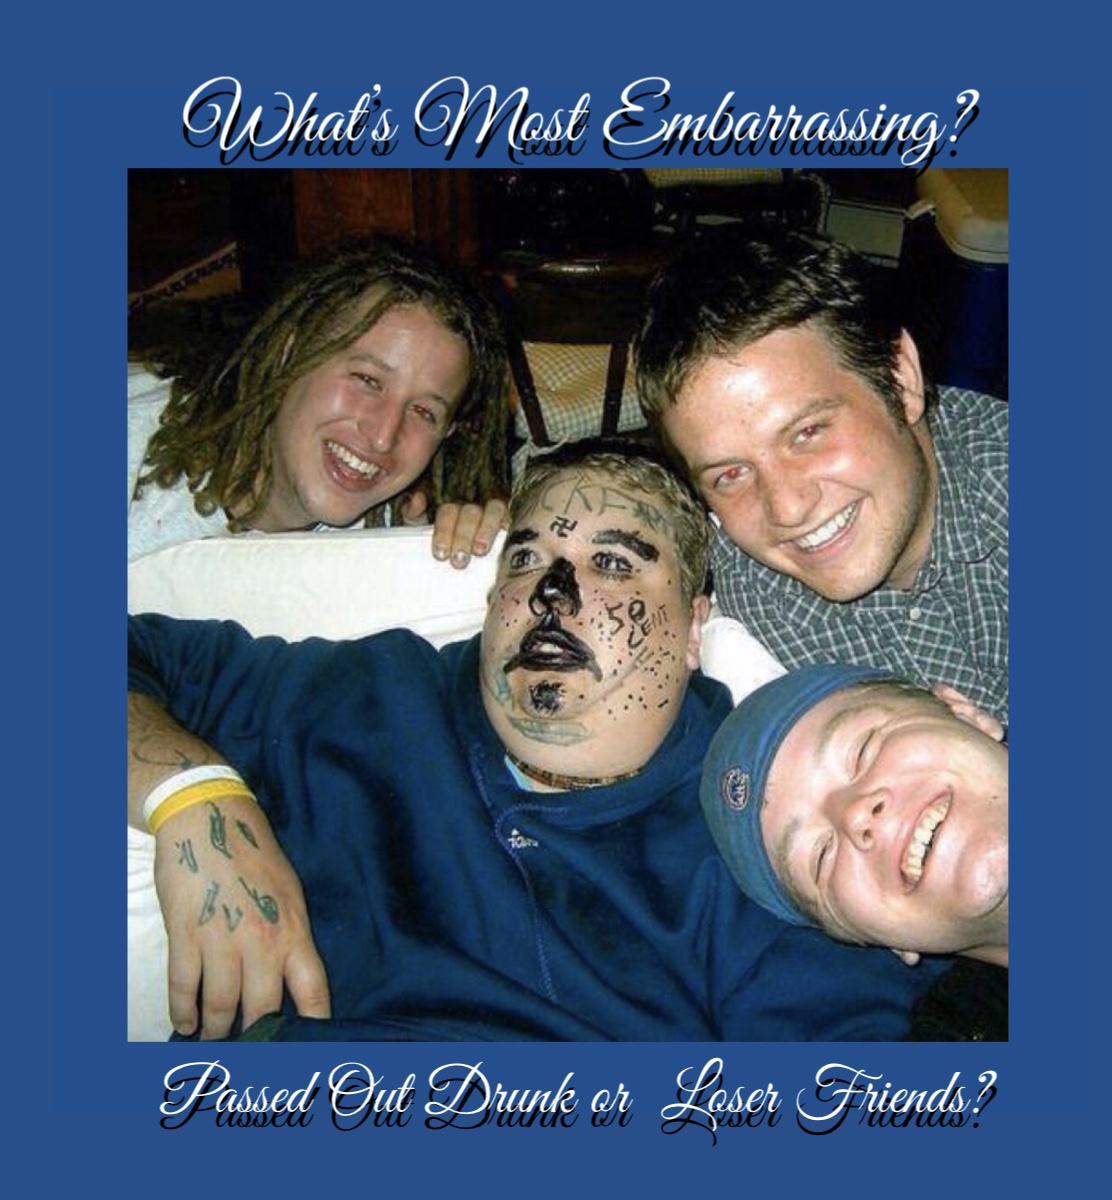 friendship - What's Most Embarrassing? Passed Out Drunk or Leser Friends?